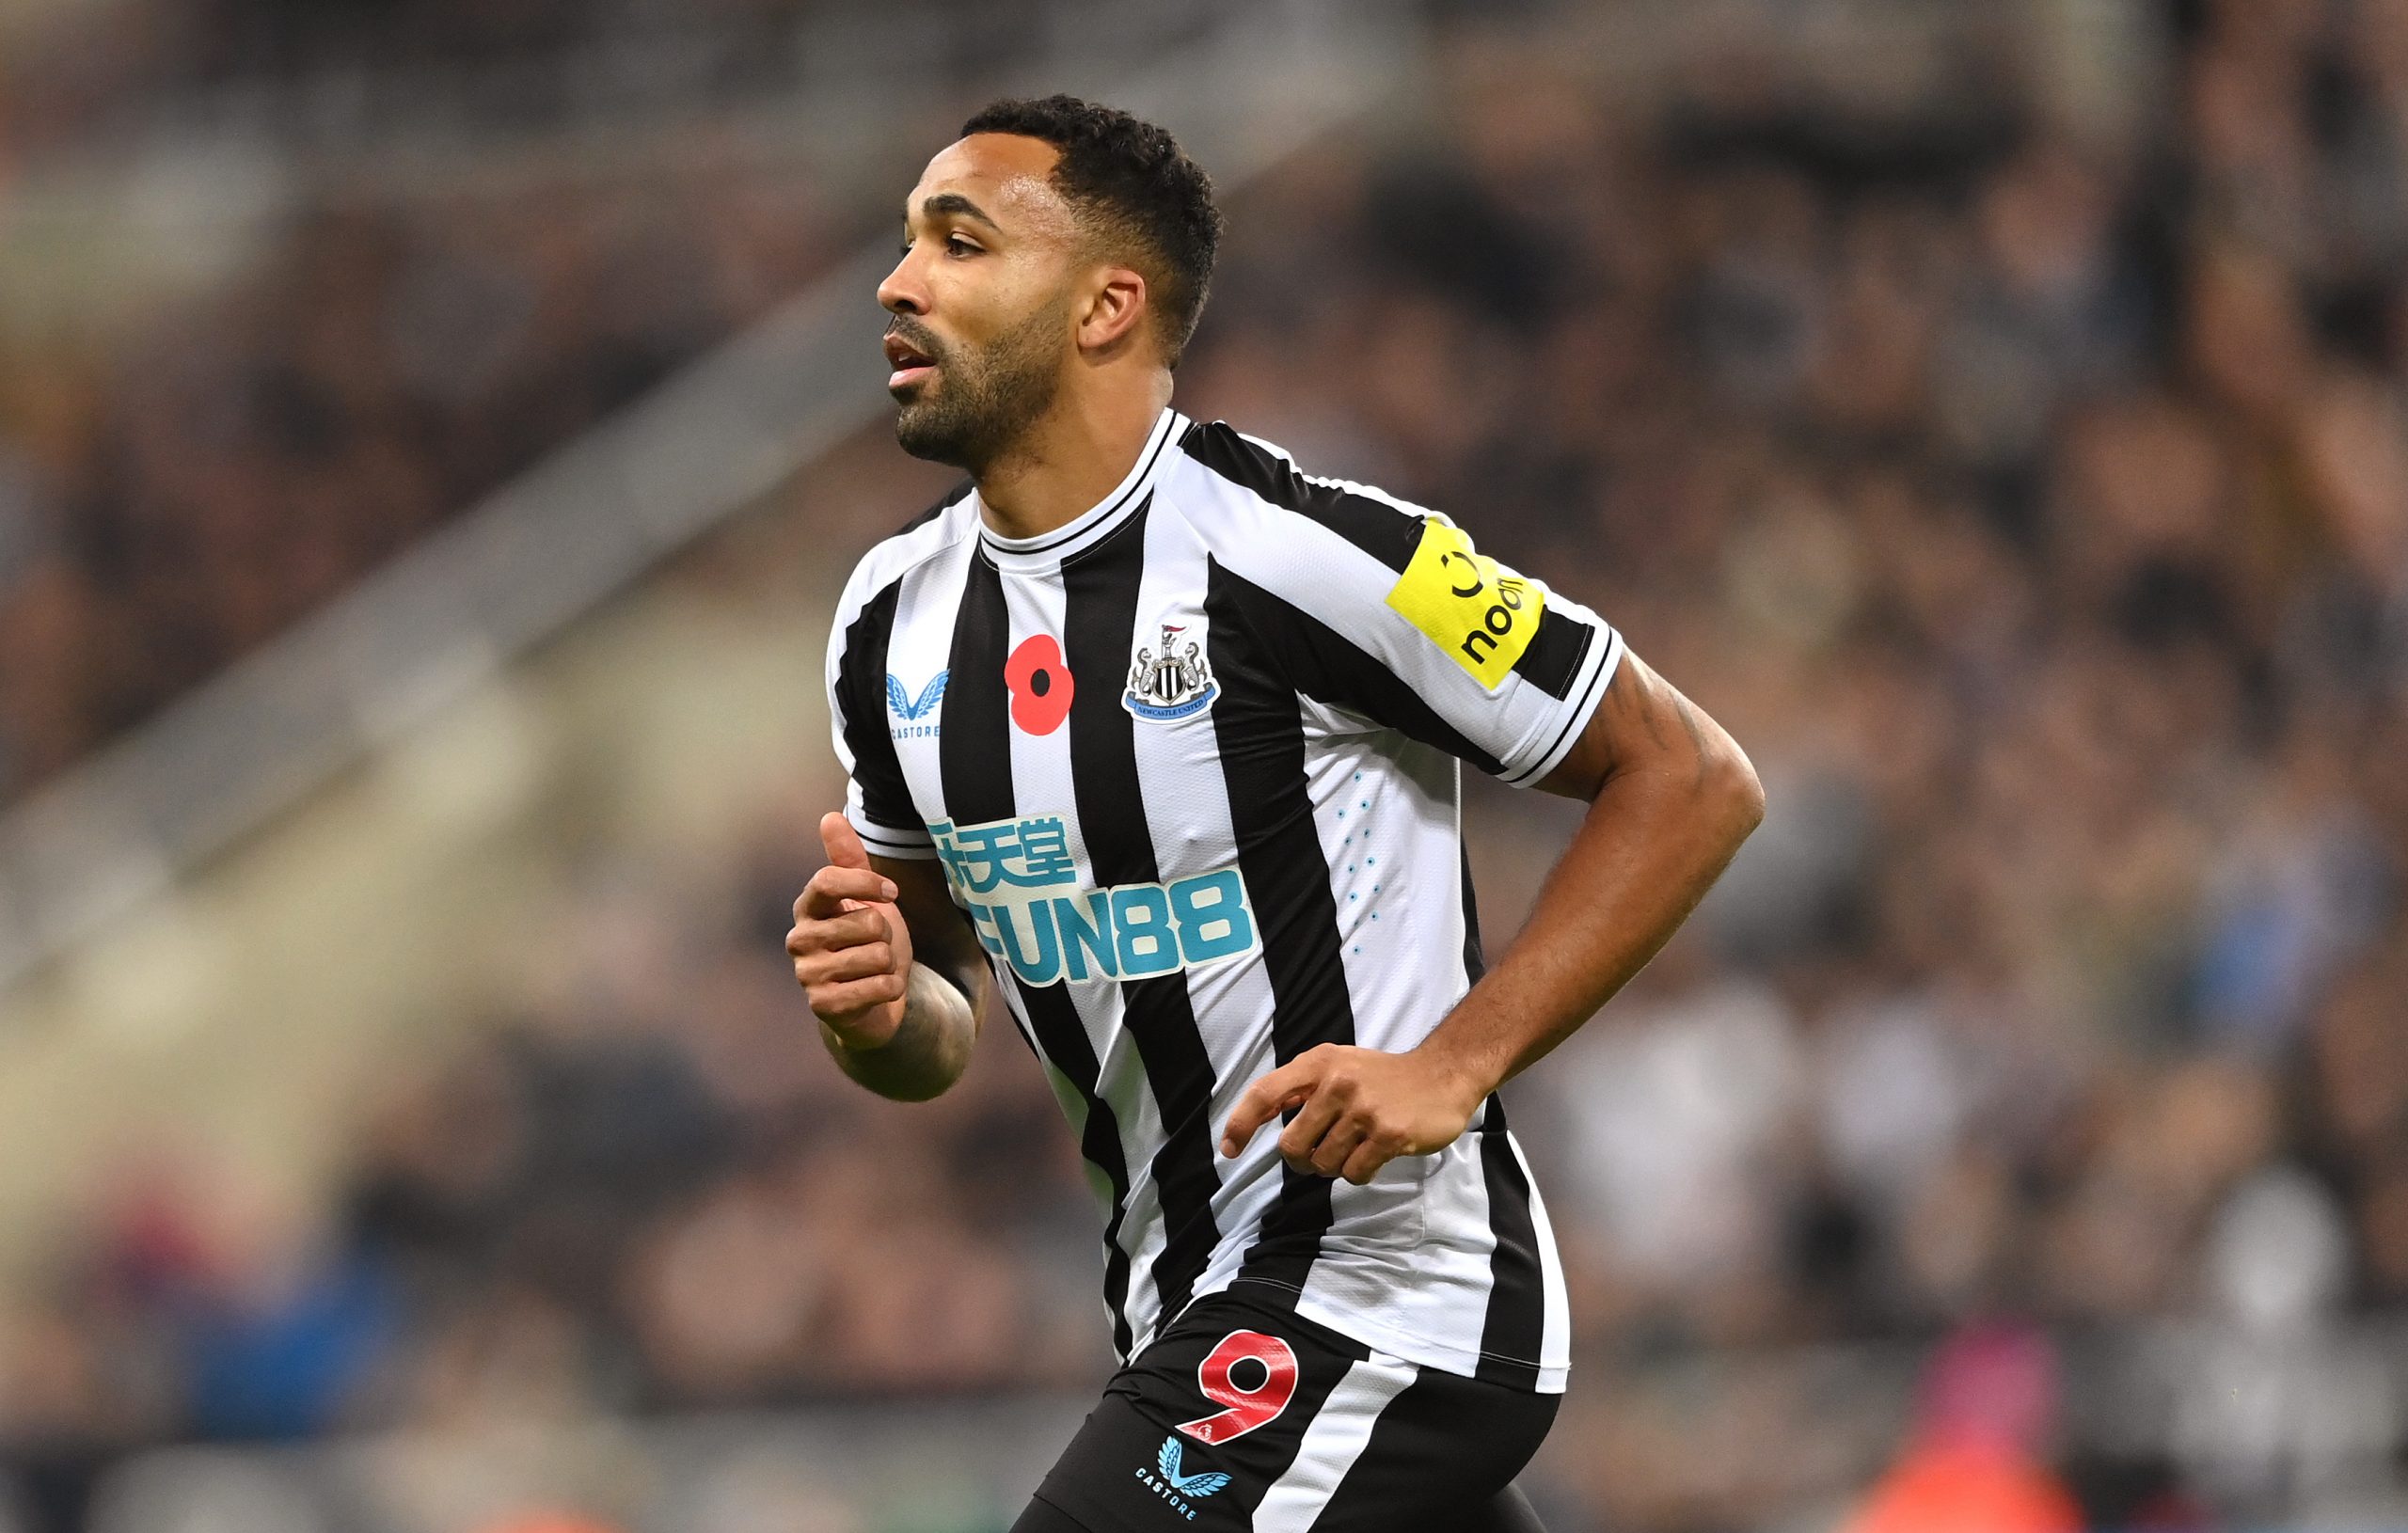 Callum Wilson in action during the Premier League match between Newcastle United and Chelsea FC at St. James Park on November 12, 2022 in Newcastle upon Tyne, England. (Photo by Stu Forster/Getty Images)